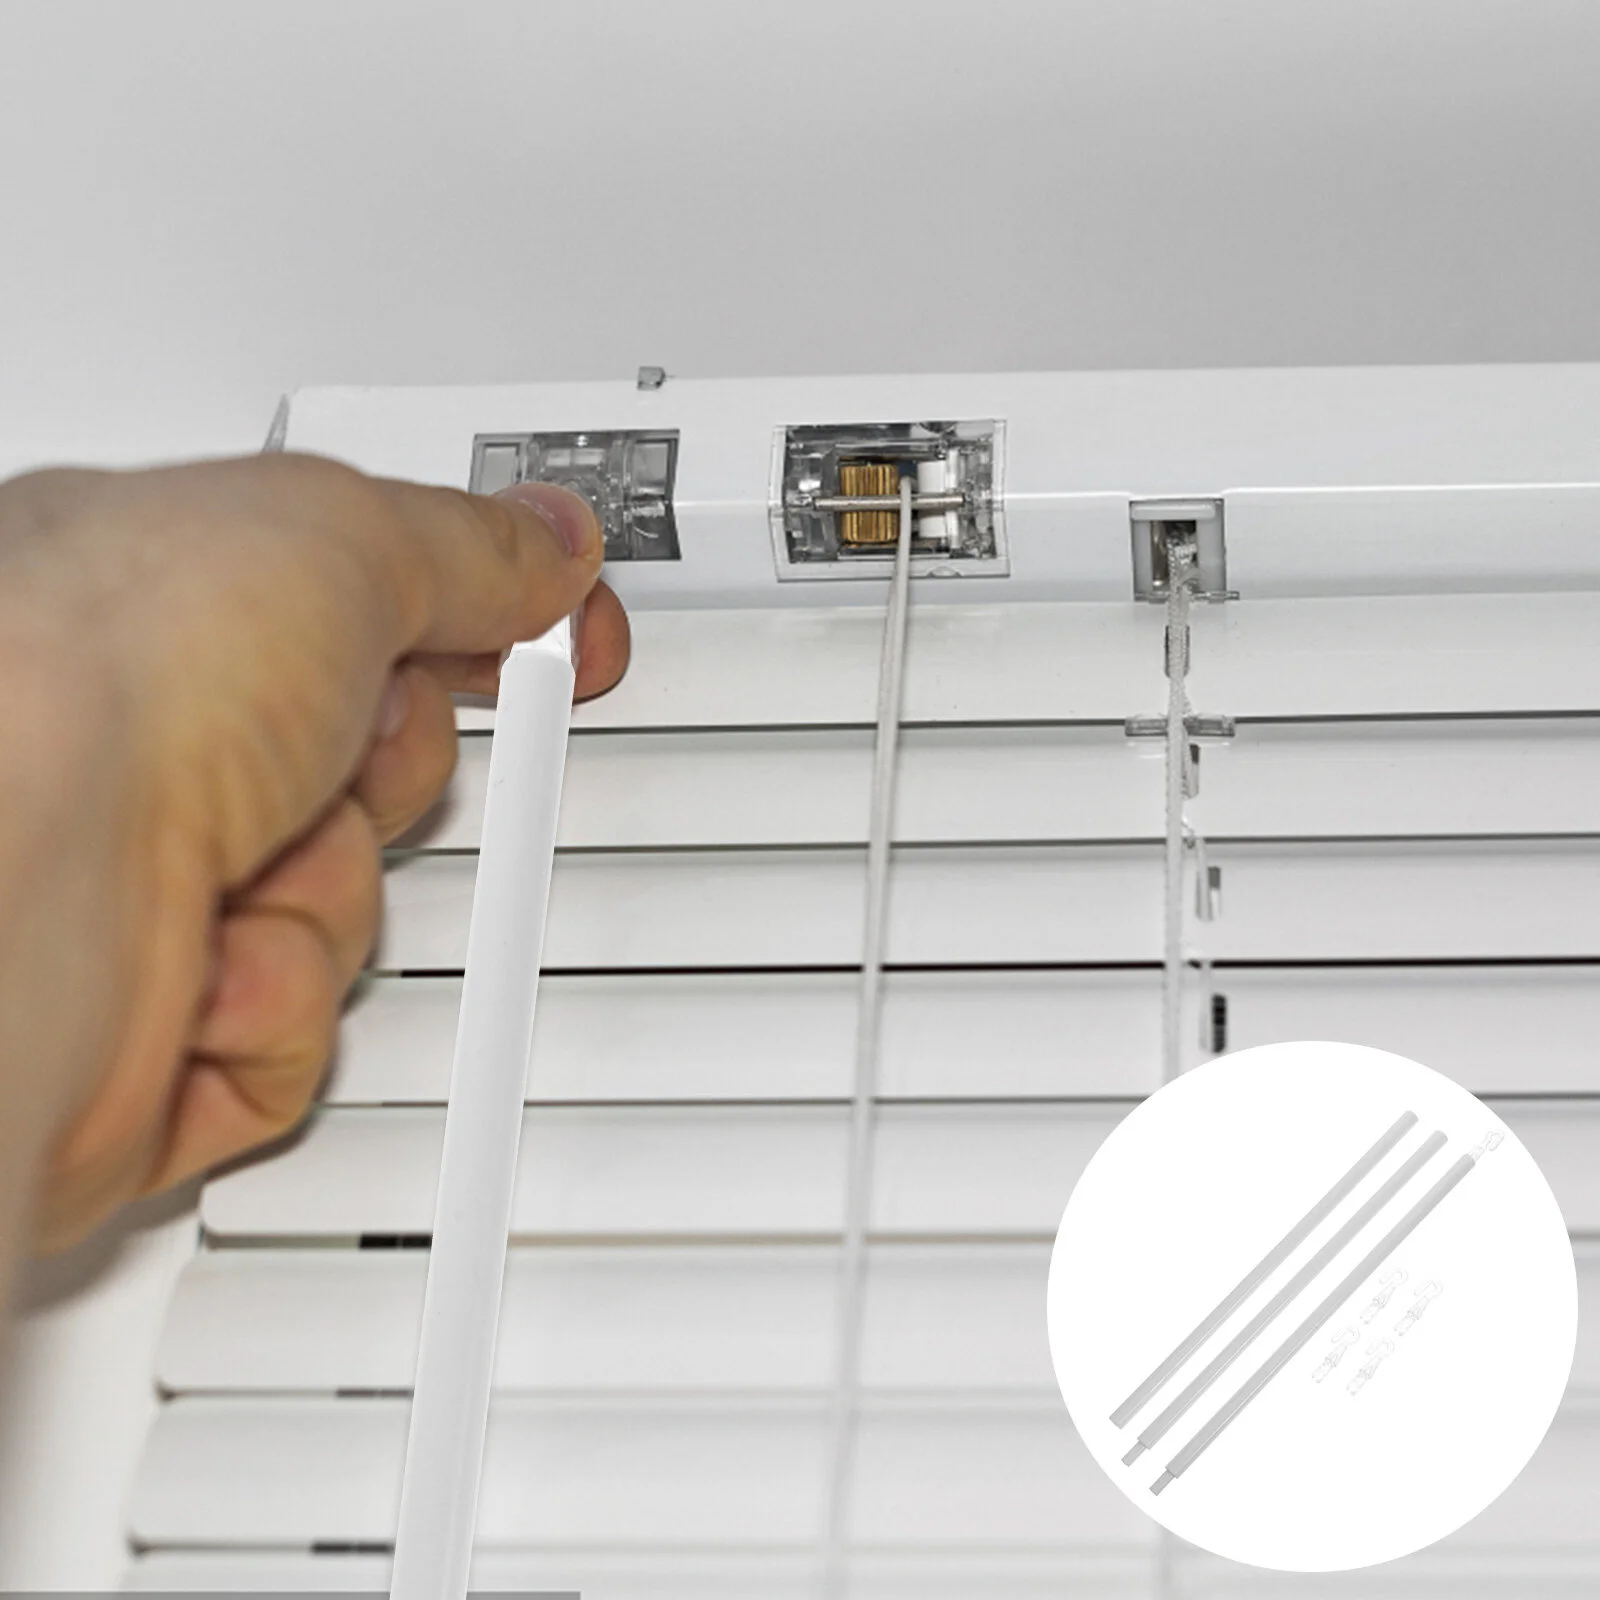 

Shutter Rotary Rod Windows Curtains Hook Stitching Blind Wand Replacement Pp Pull Vertical Repair Tilt Accessories